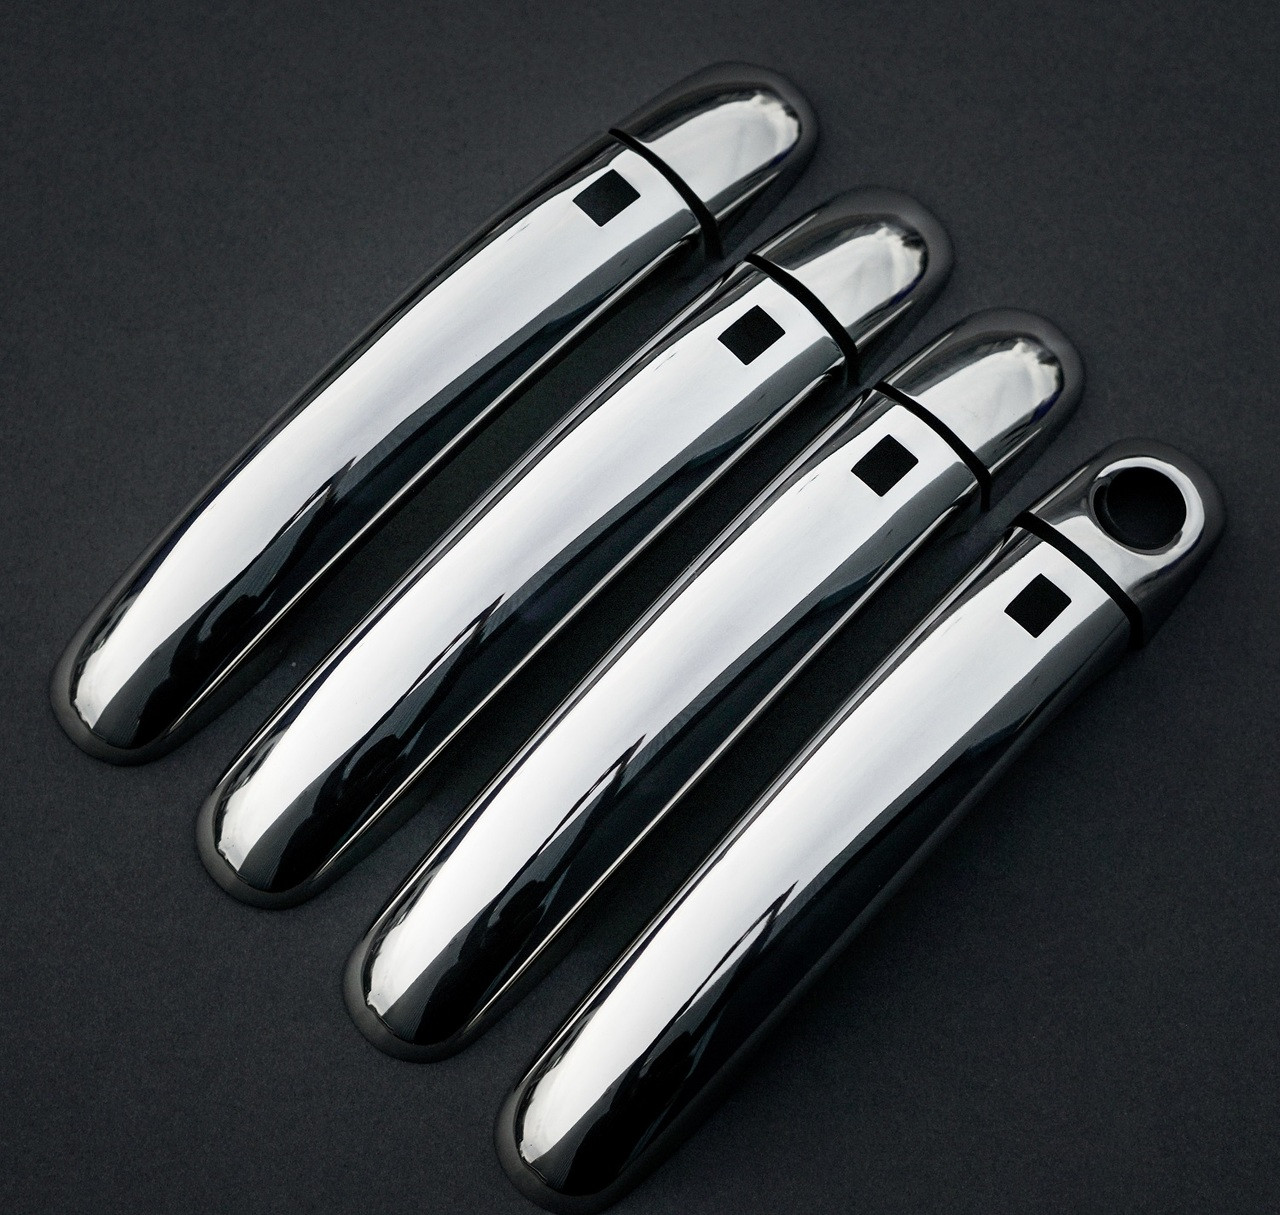 Chrome Door Handle Trim Set Covers (W/ Keyless Entry) To Fit Audi Q7 (2006-14)